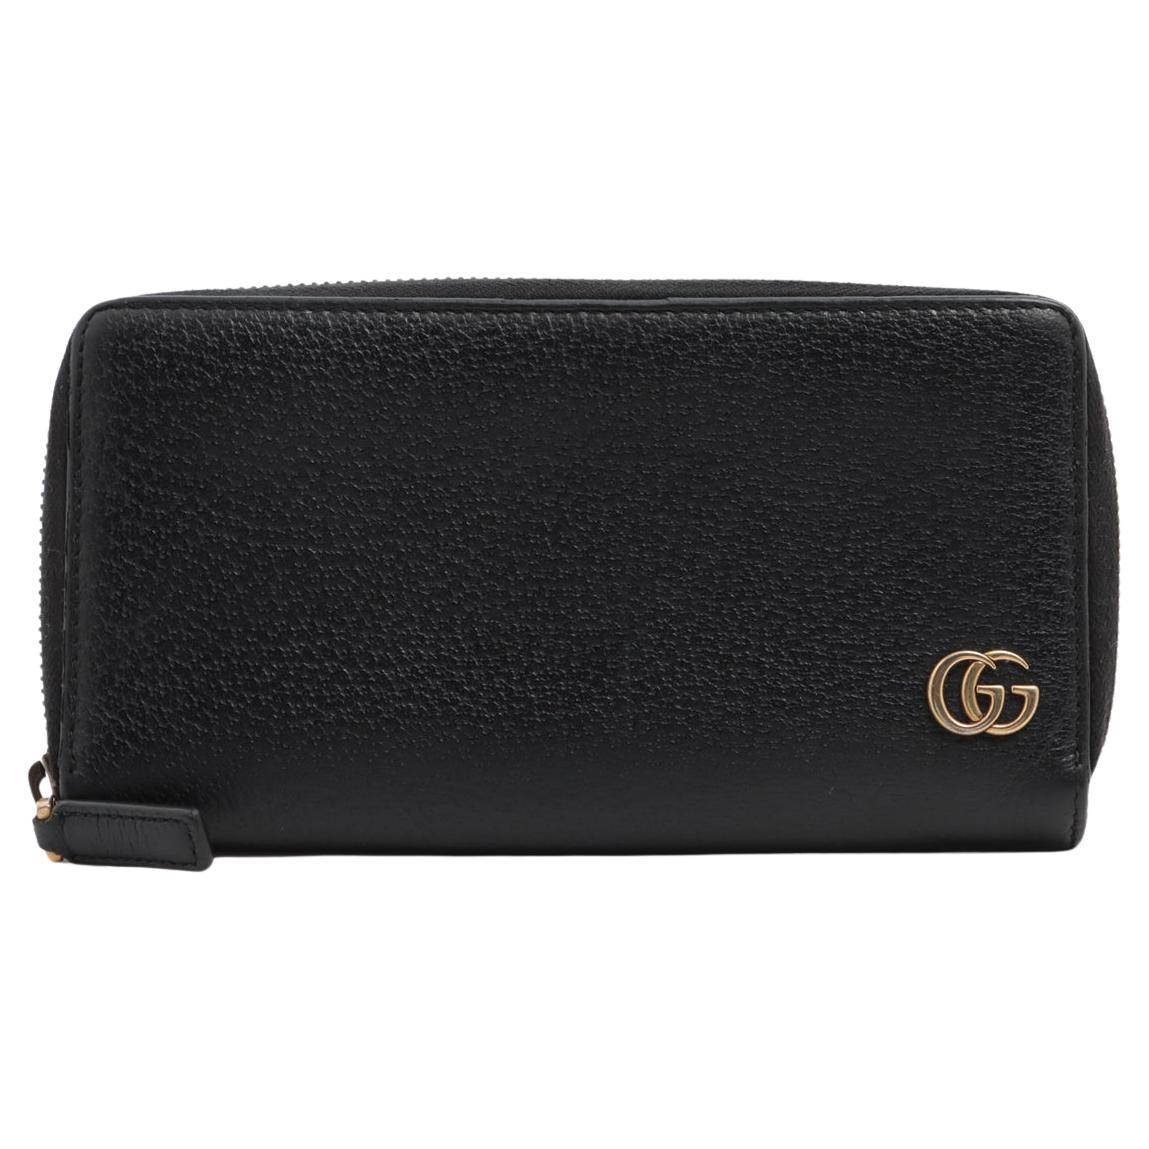 Gucci GG Marmont Calf Leather Zip Around Long Wallet Black